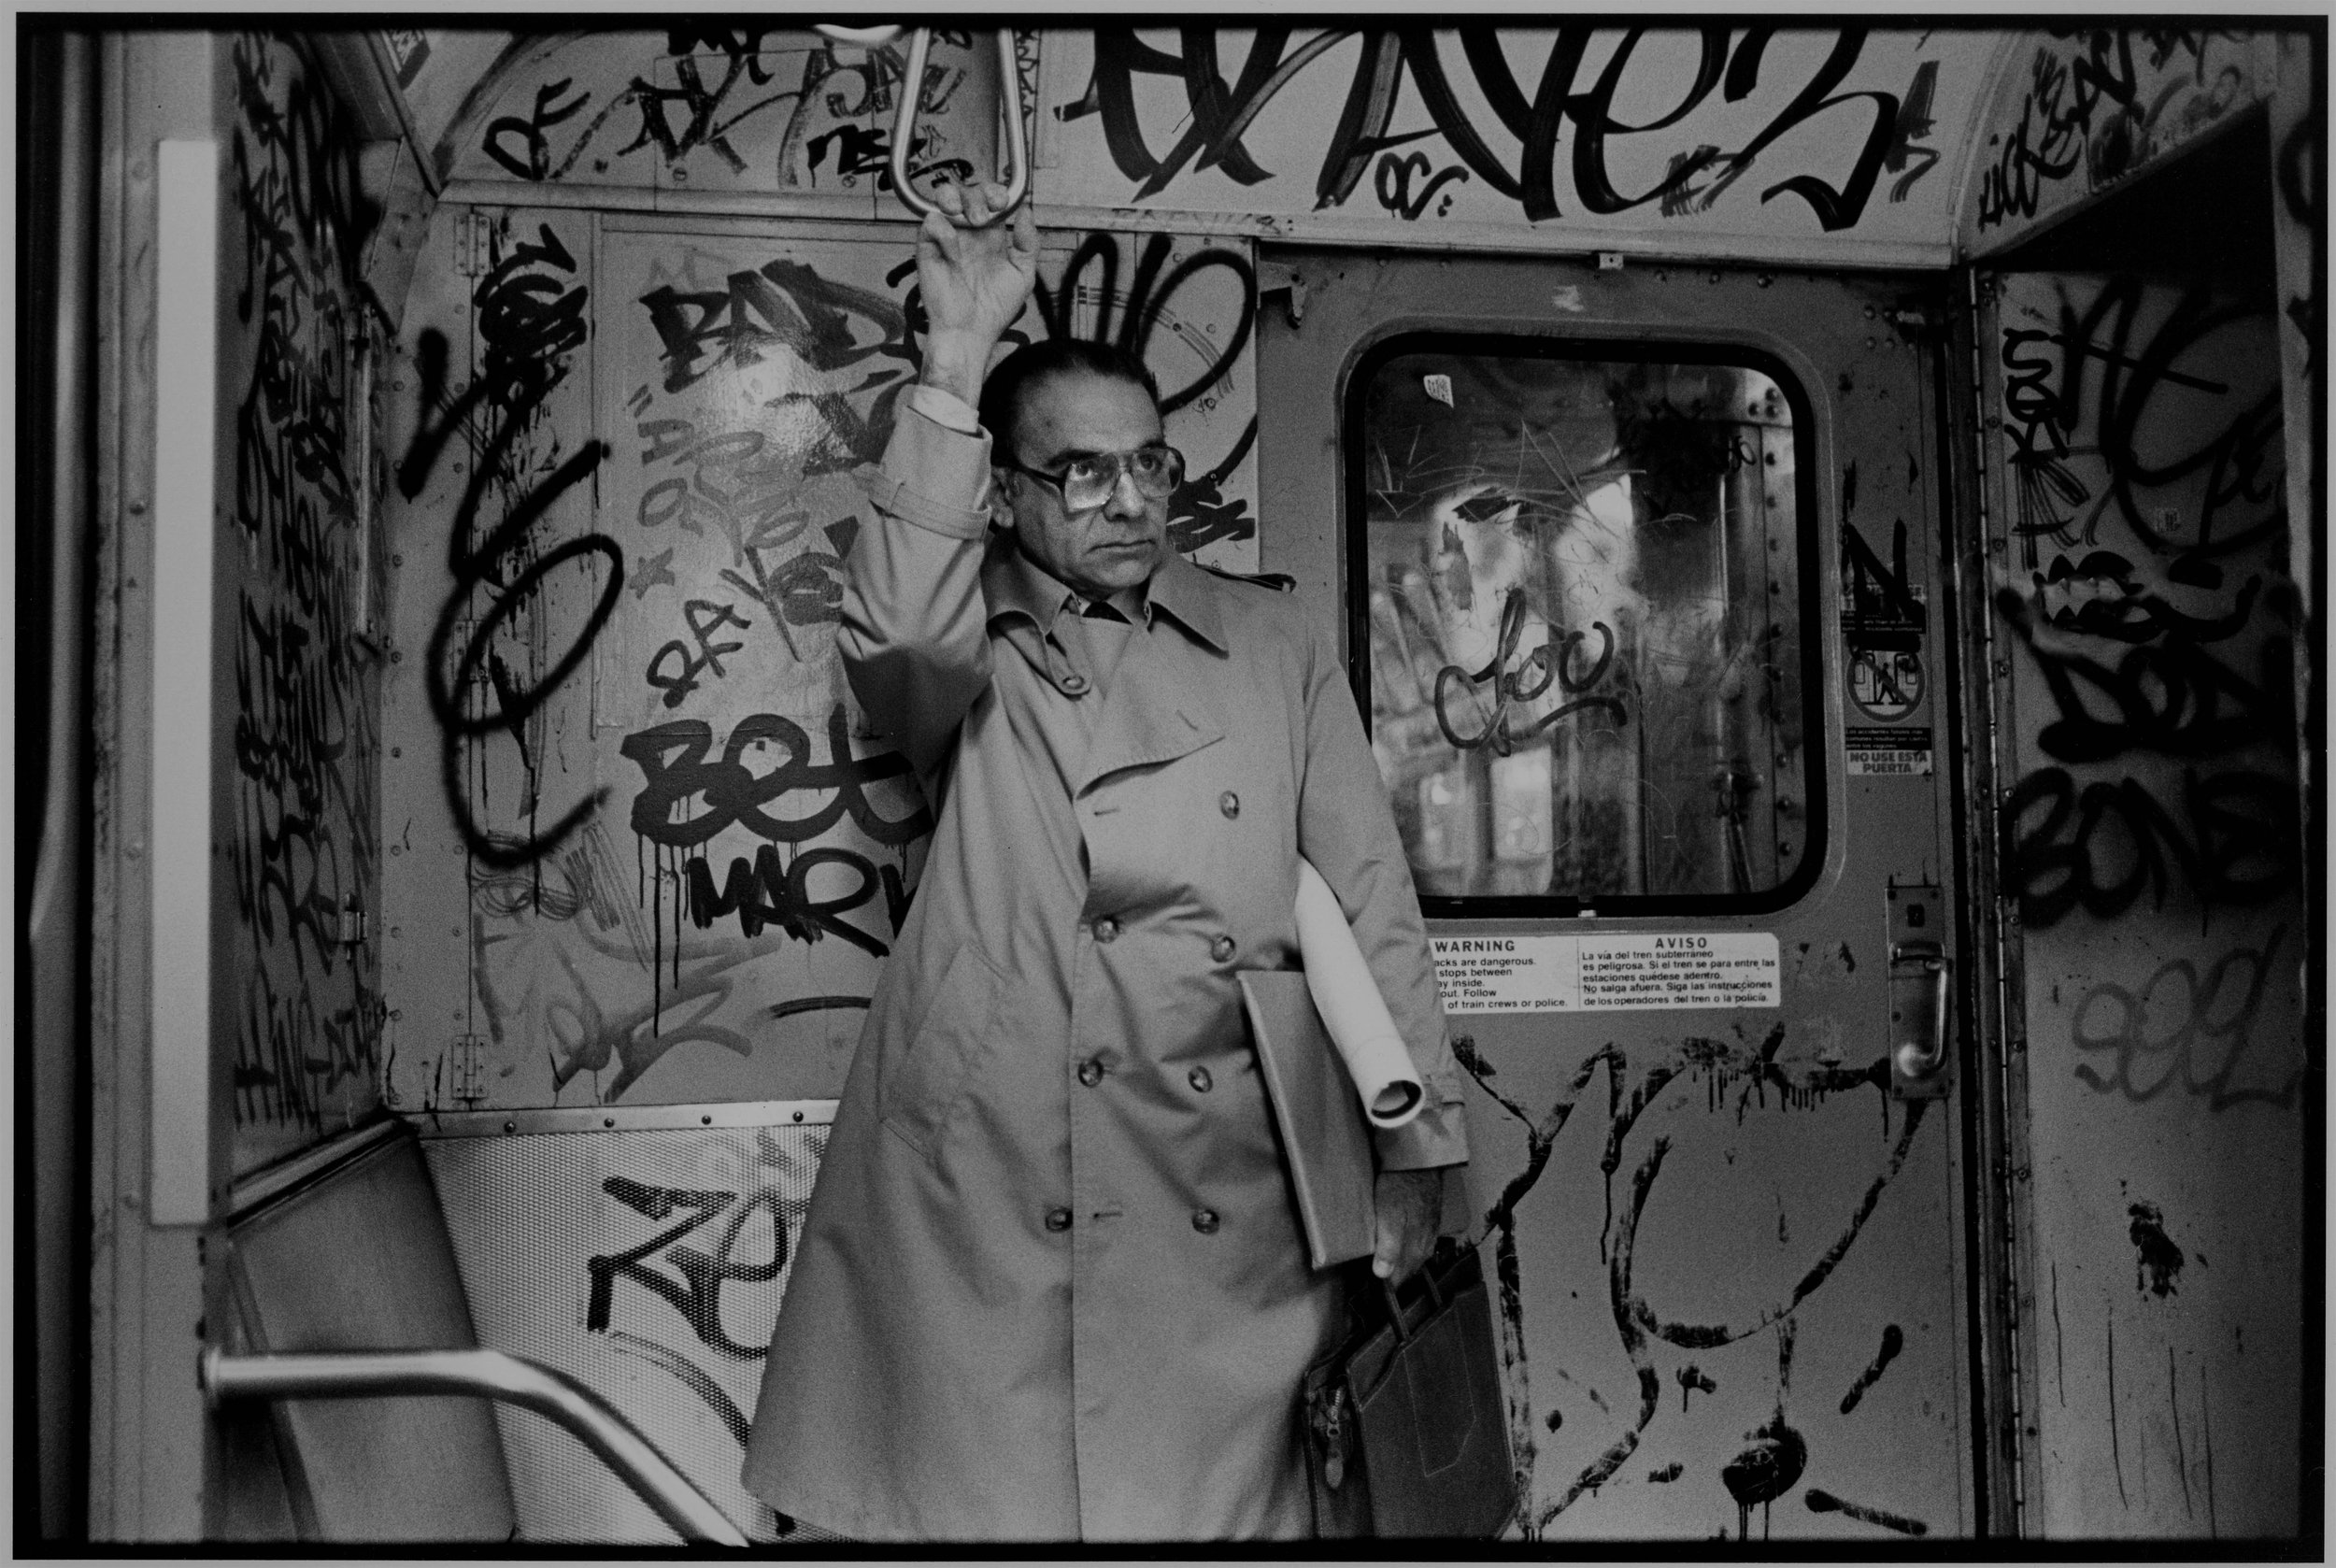 man with plans on graff train, nyc, mid 1980’s